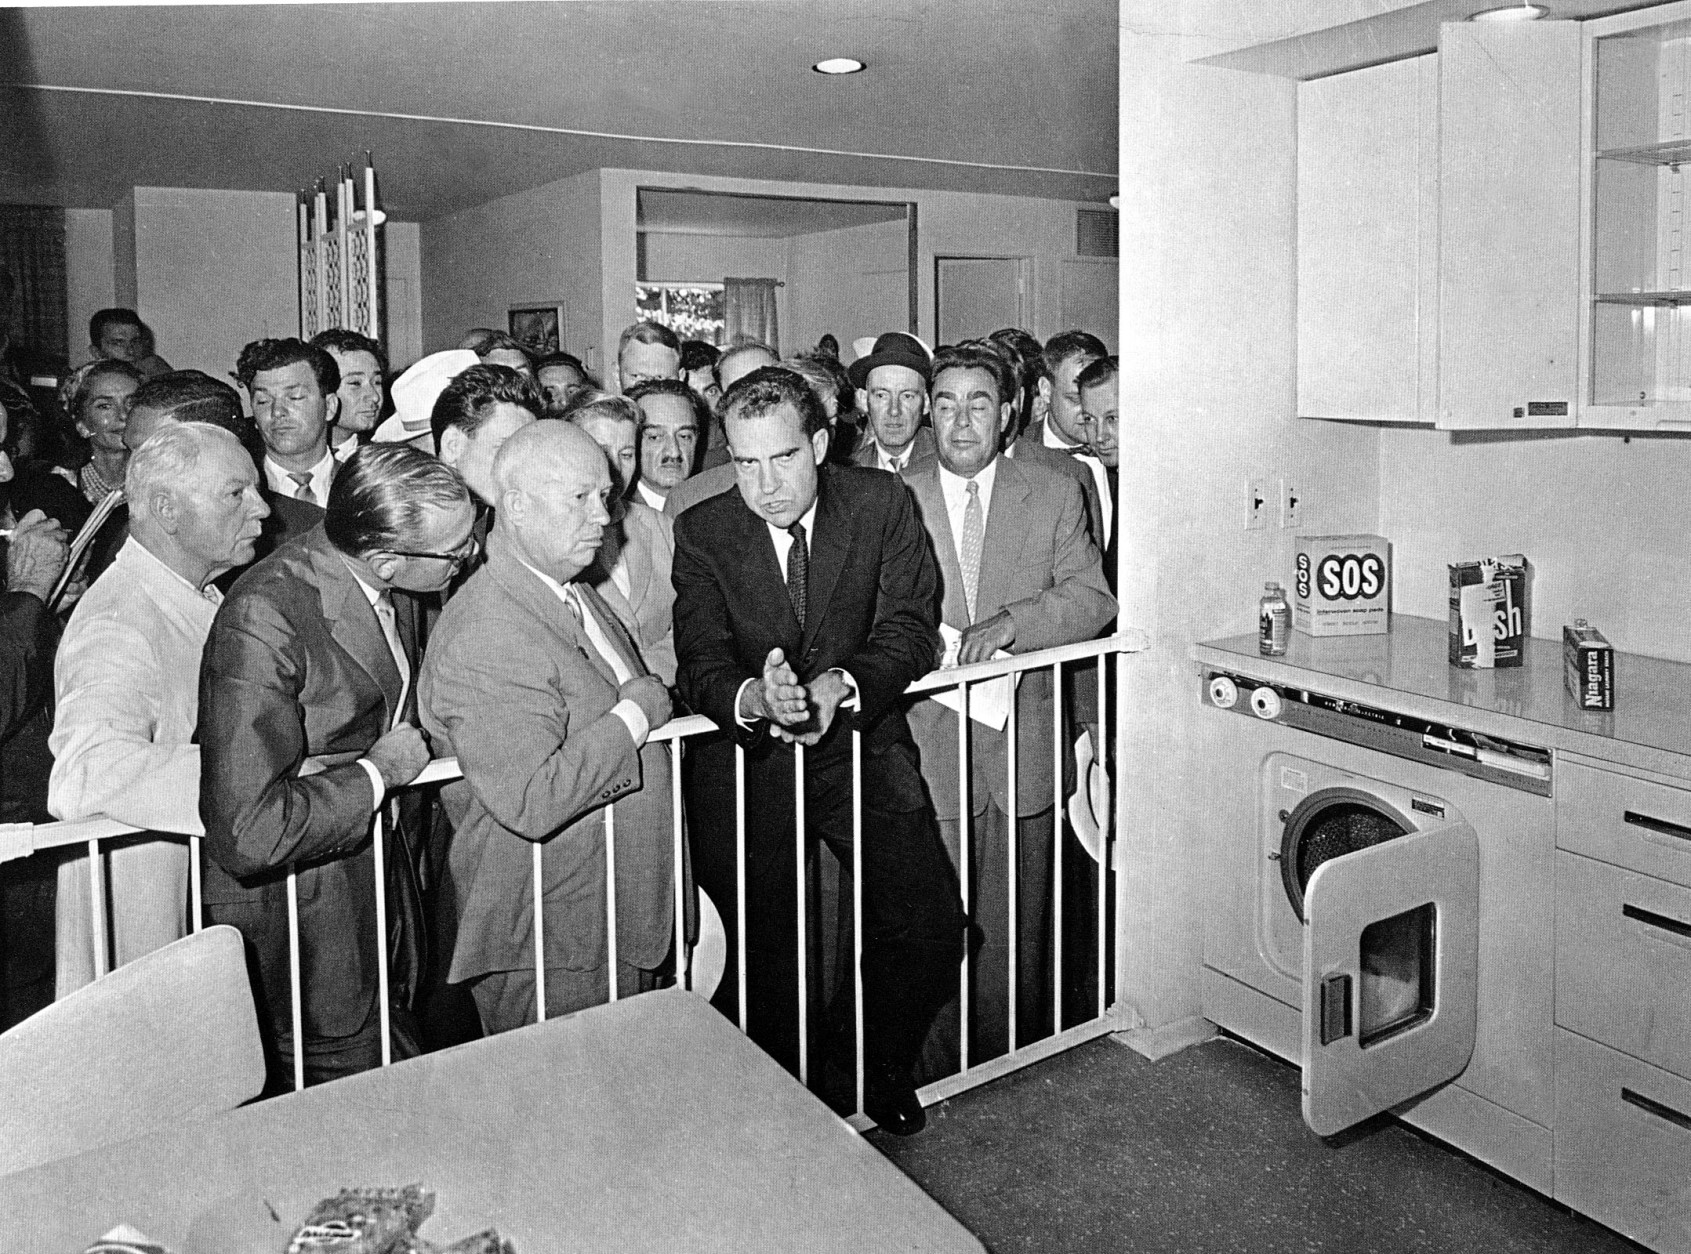 Soviet Premier Nikita Khrushchev, center left, talks with U.S. Vice President Richard Nixon during their famous "Kitchen Debate" at the United States exhibit at Moscow's Sokolniki Park, July 24, 1959.  While touring the exhibit, both men kept a running debate on the merits of their respective countries. Standing to the right is Khrushchev's deputy, Leonid Brezhnev.  (AP Photo)